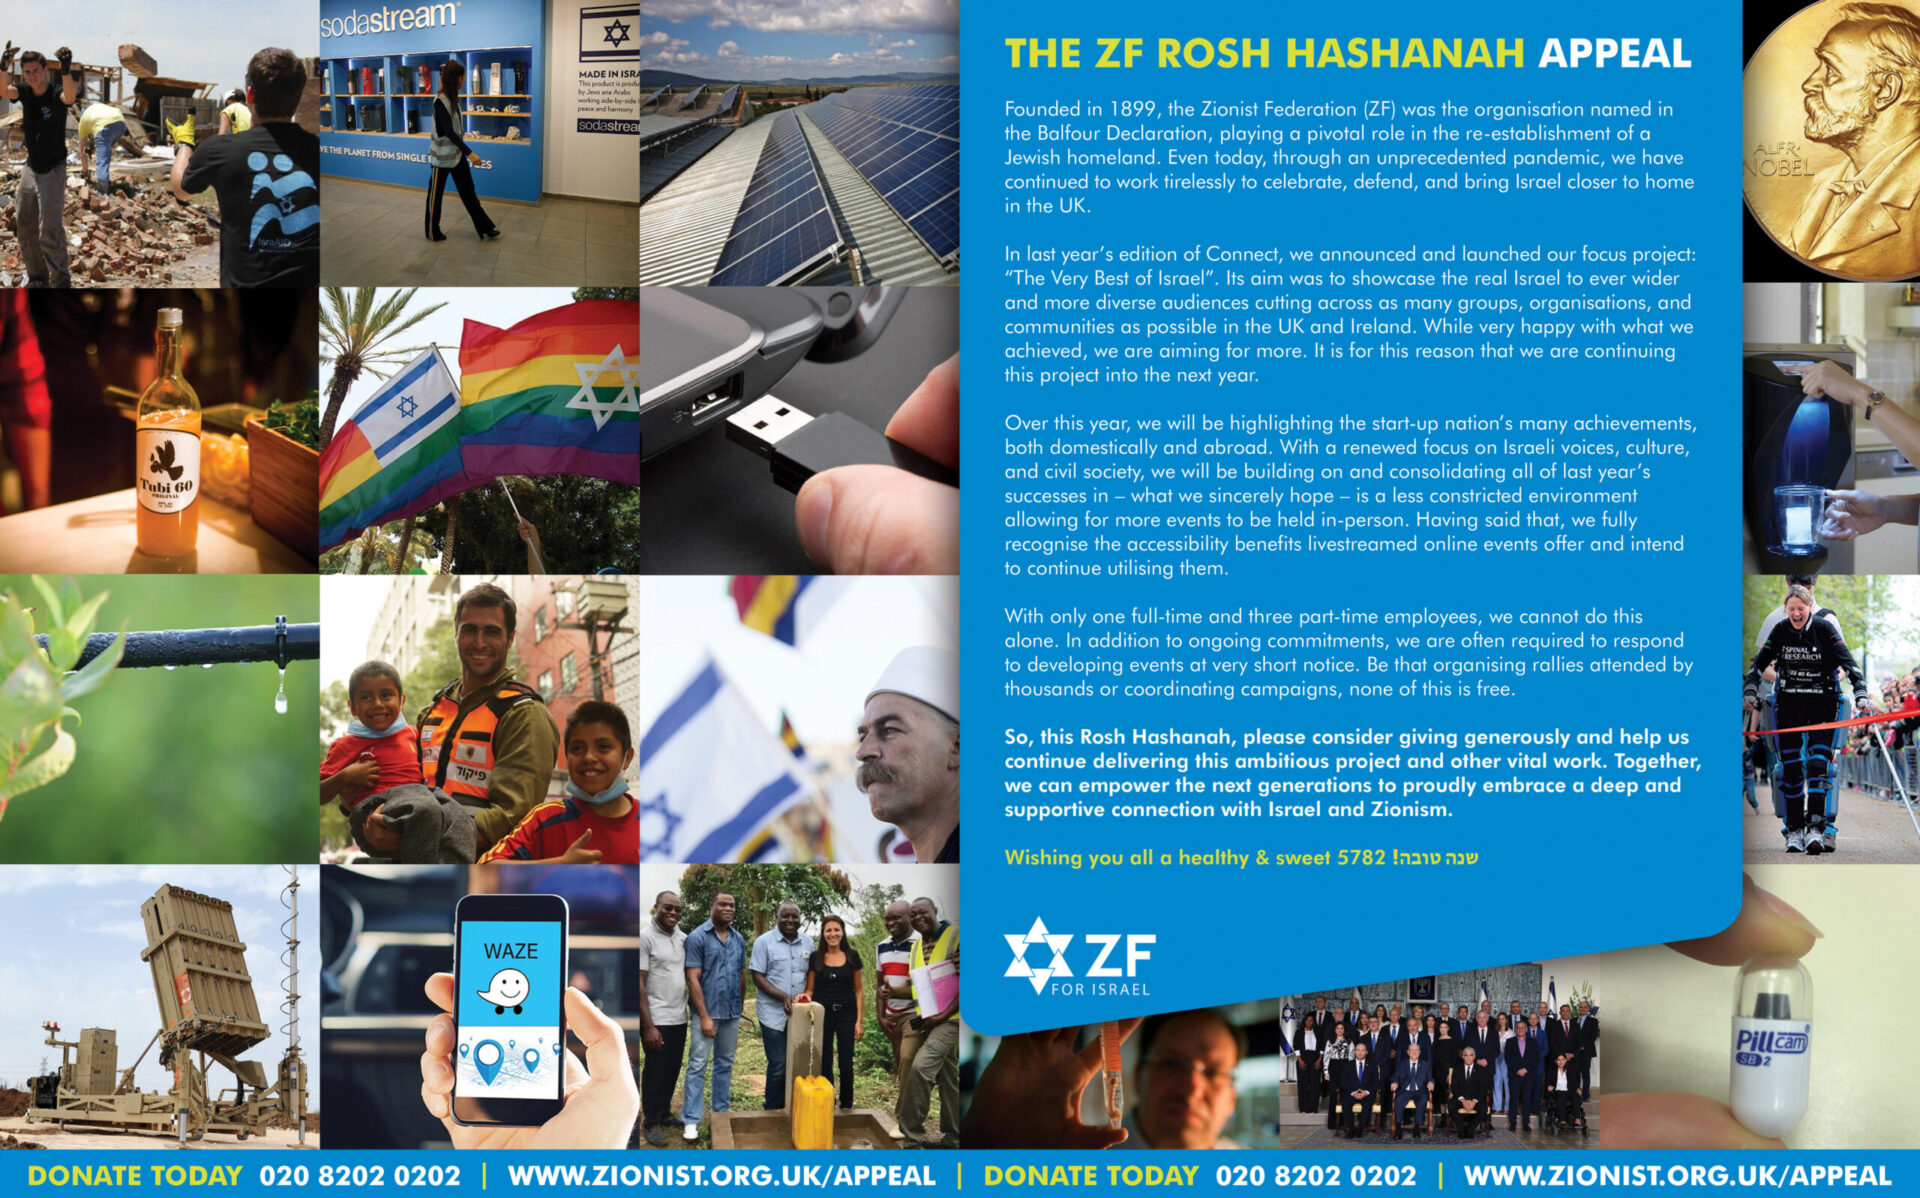 The ZF Rosh Hashanah Appeal